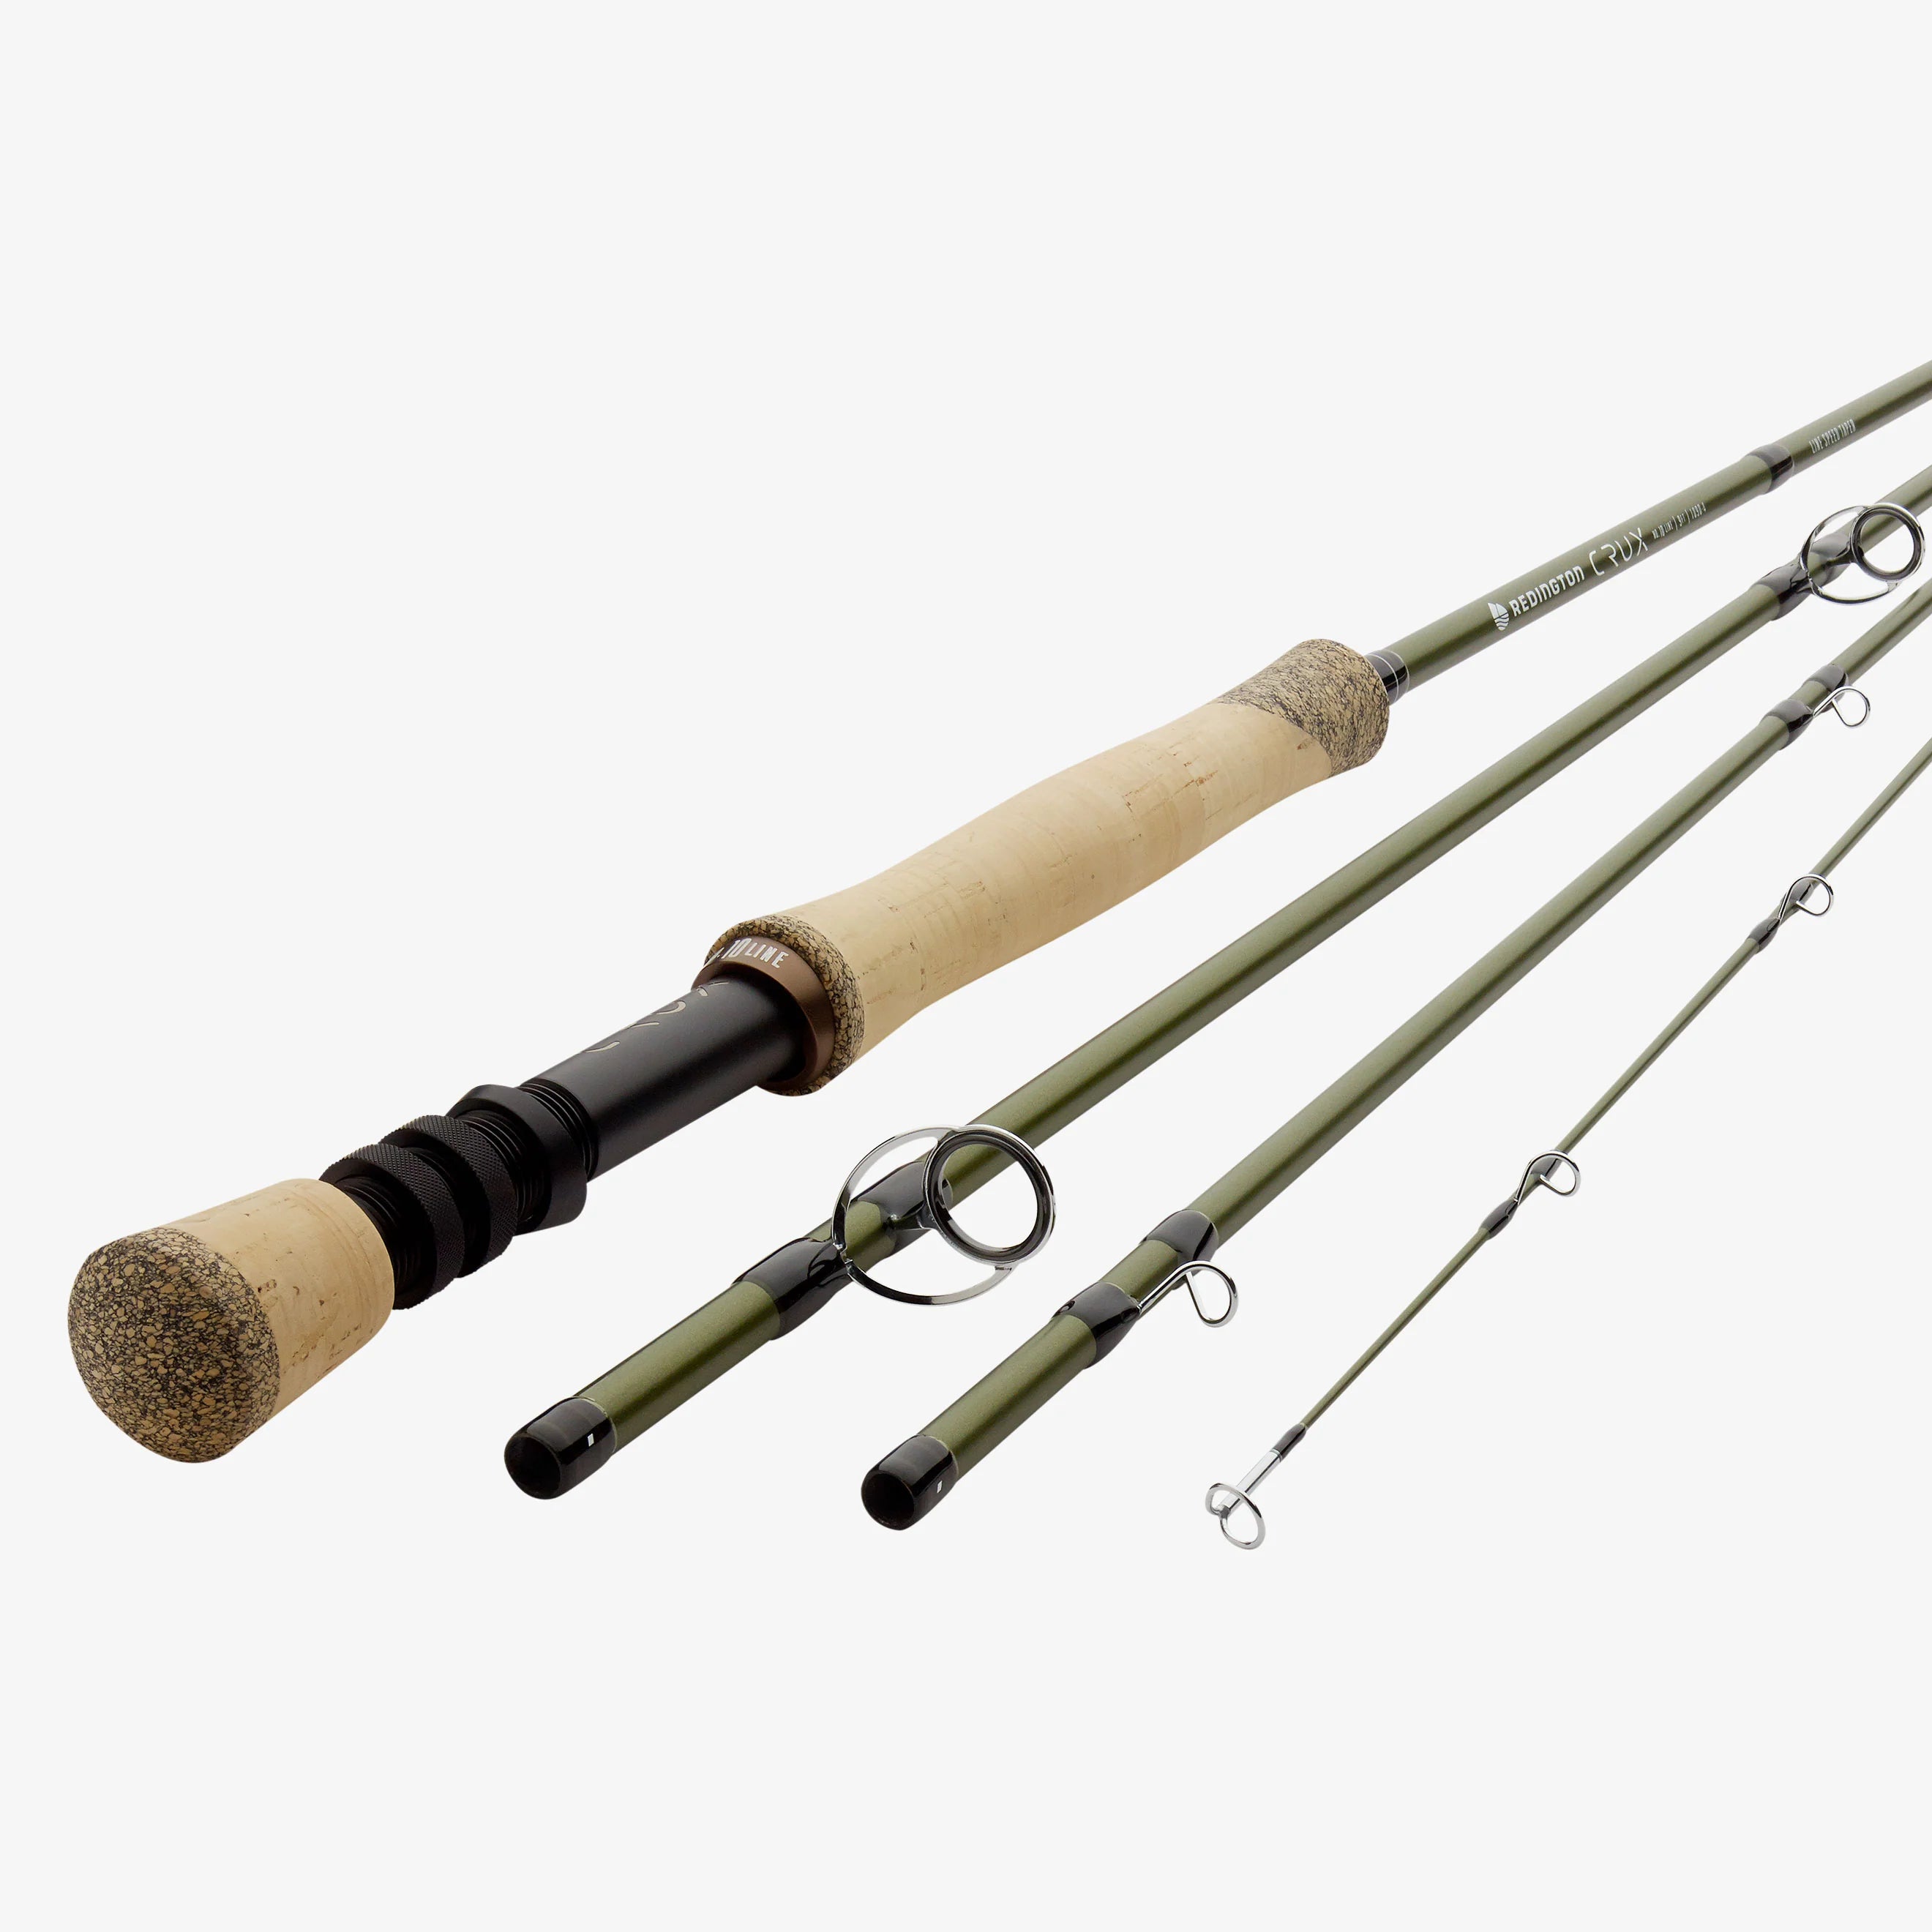 Redington Path Combo 9 foot 5 weight Fly fishing Rod Reel Line Case -  Armadale Angling